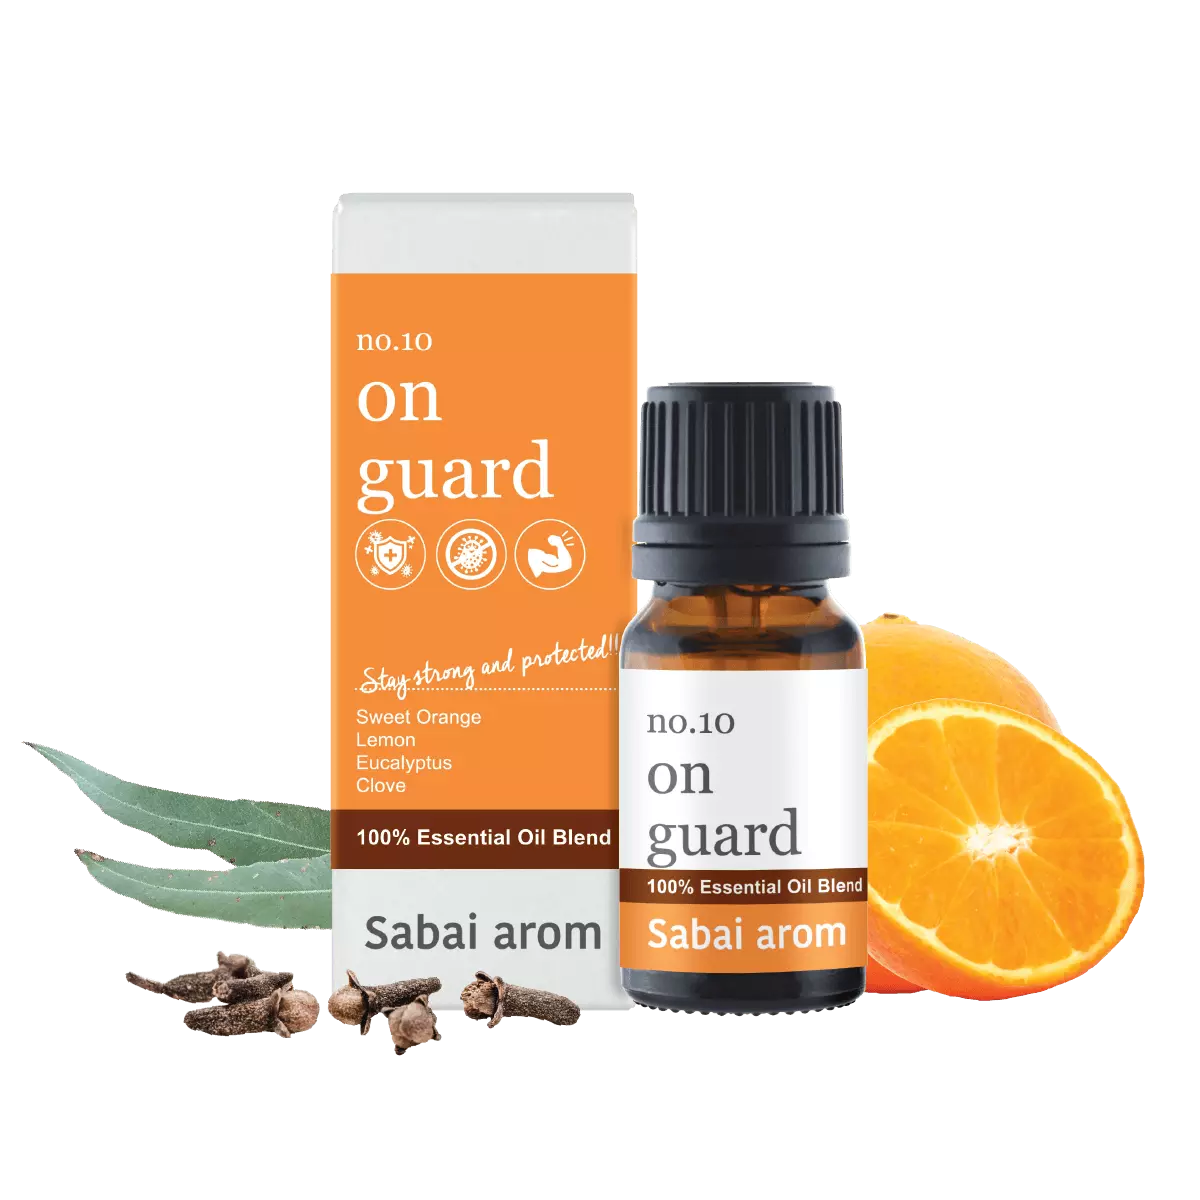 essential oil no10 on guard On Guard employs the protective power of Clove, Sweet Orange, Lemon and Eucalyptus to shield you from environmental threats be it pollution, bad smells, viruses and others, while boosting your immune to be strong and thick. This blend is led by mild spiciness of Clove with herbaceous undertones, resembling the moment we are entering into a garden of countless herbs, where we basically feel secured and well protected. <strong>Scent</strong> : The contrastive combination of warming aroma of clove kisses the euphoric indentity of orange that somehow creates a perfect couple from differnt trait, making you feel warm at heart and safe in your own strenght.